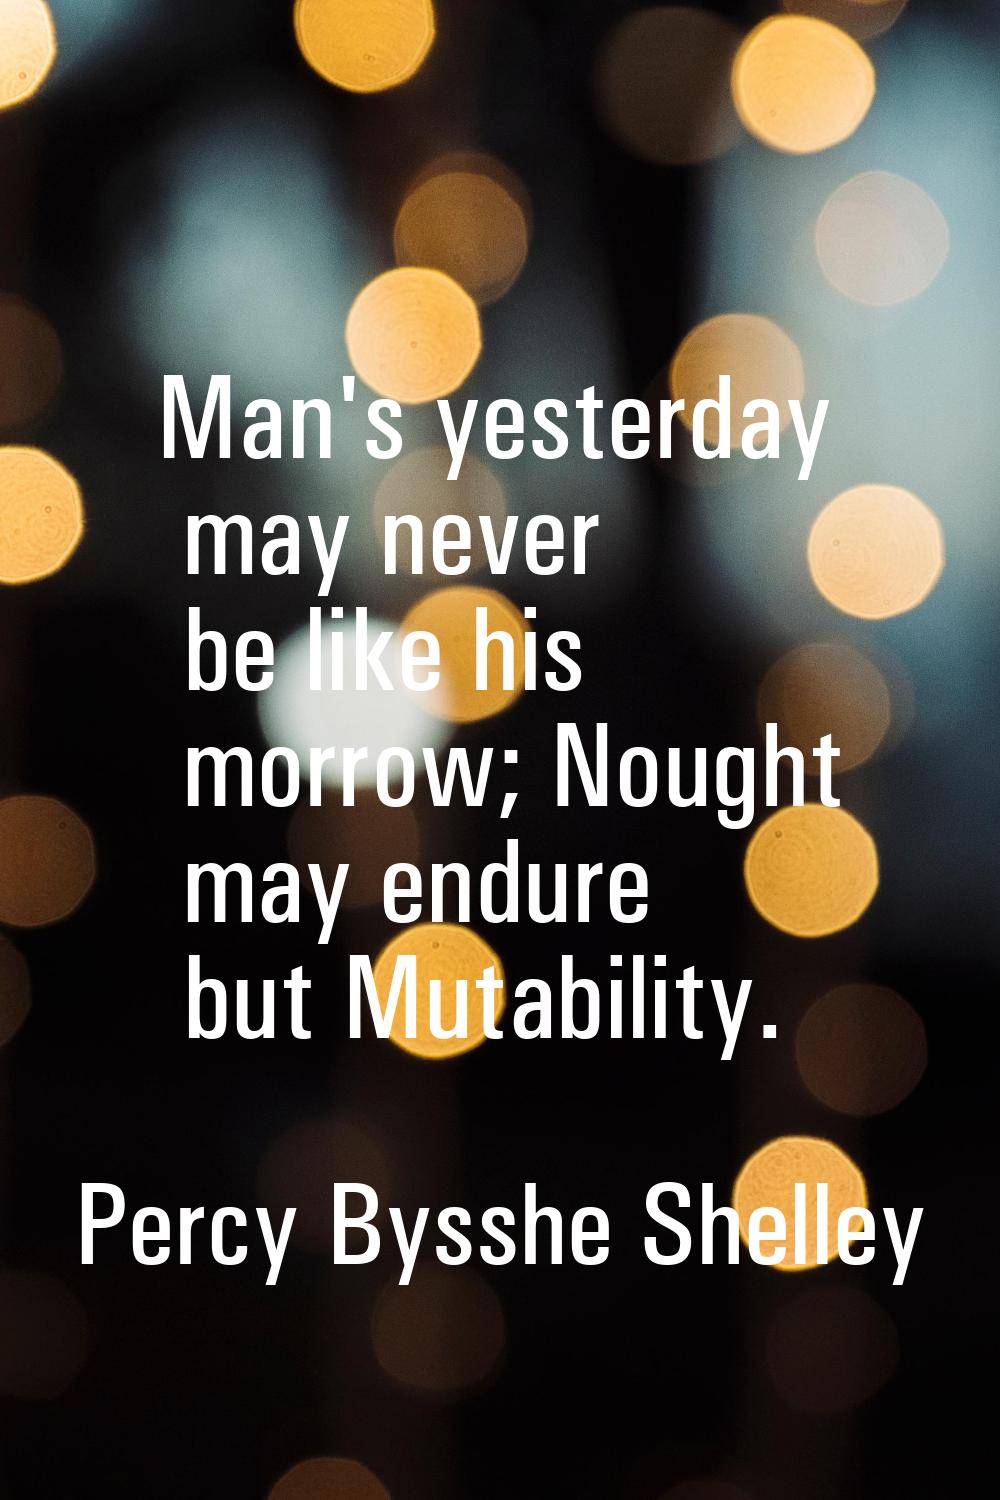 Man's yesterday may never be like his morrow; Nought may endure but Mutability.